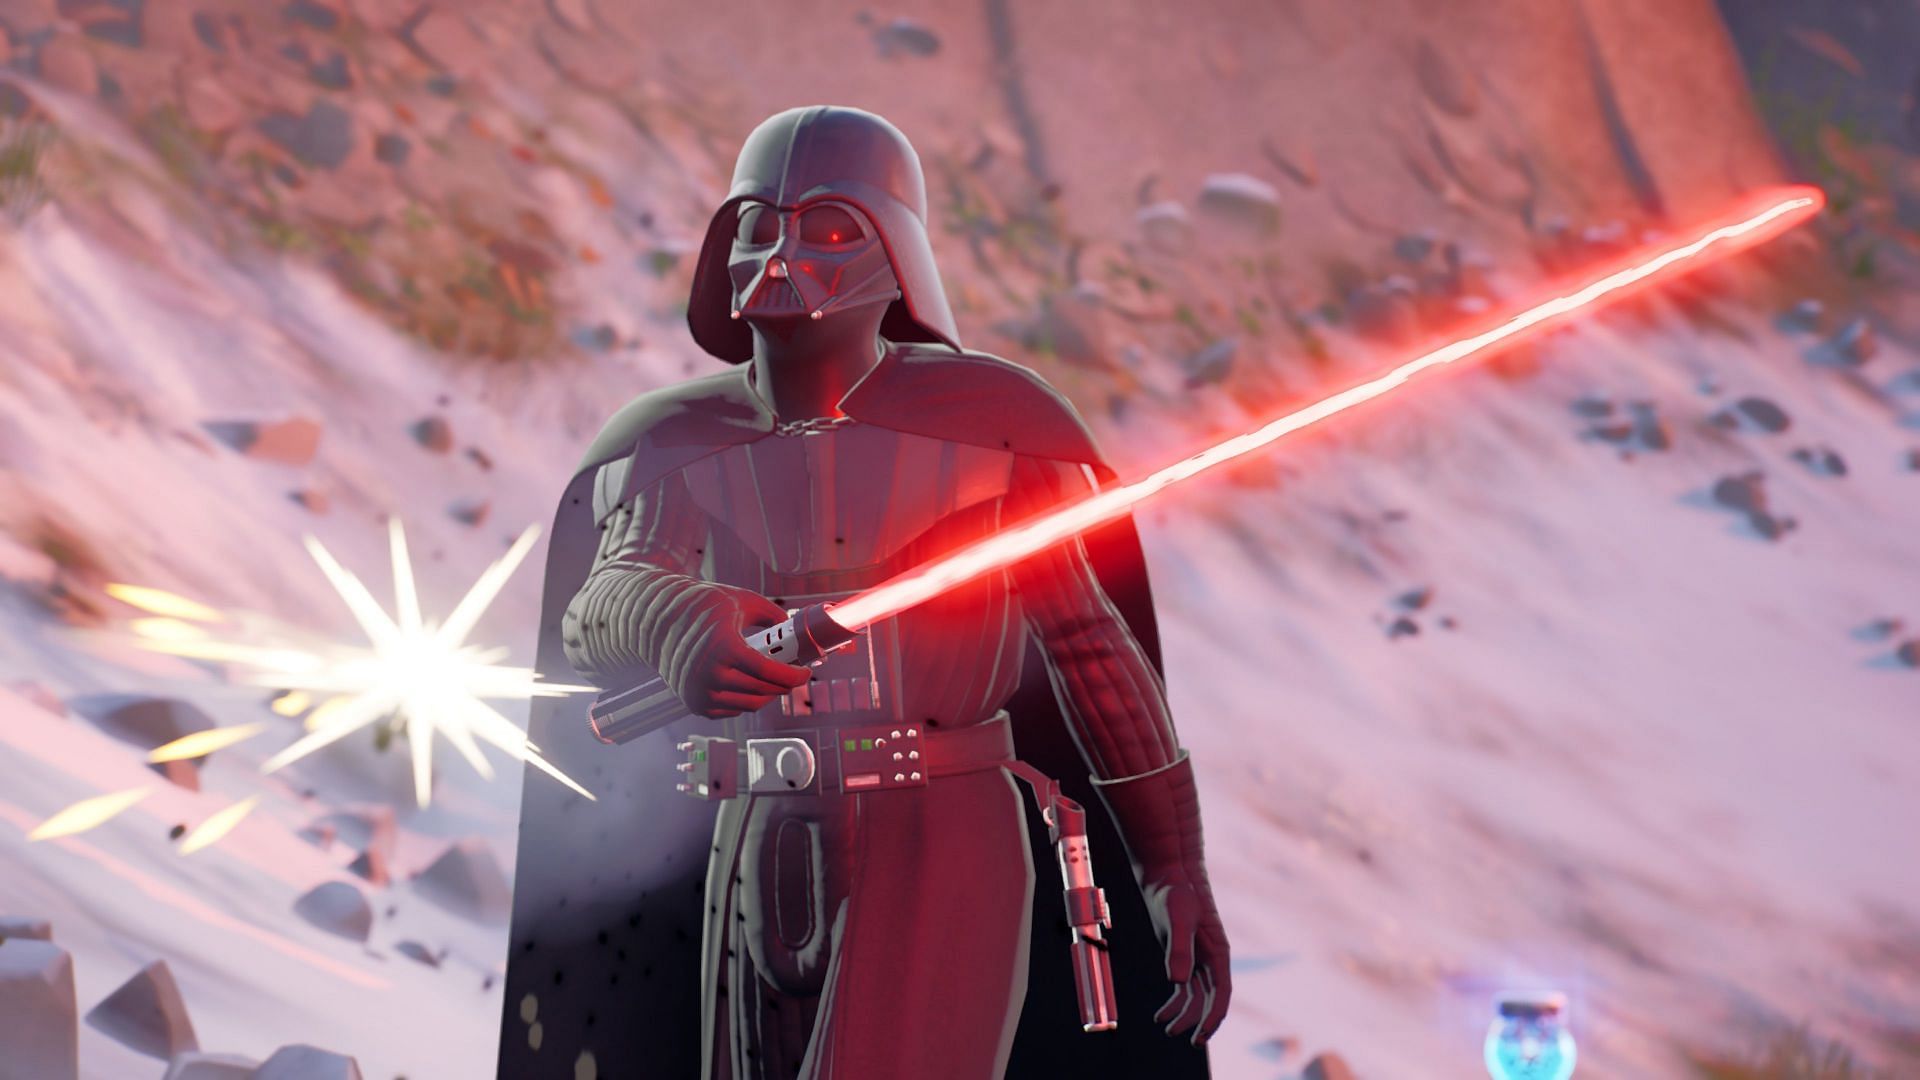 Darth Vader is the Level 100 reward in the Chapter 3 Season 3 Battle Pass (Image via Epic Games)